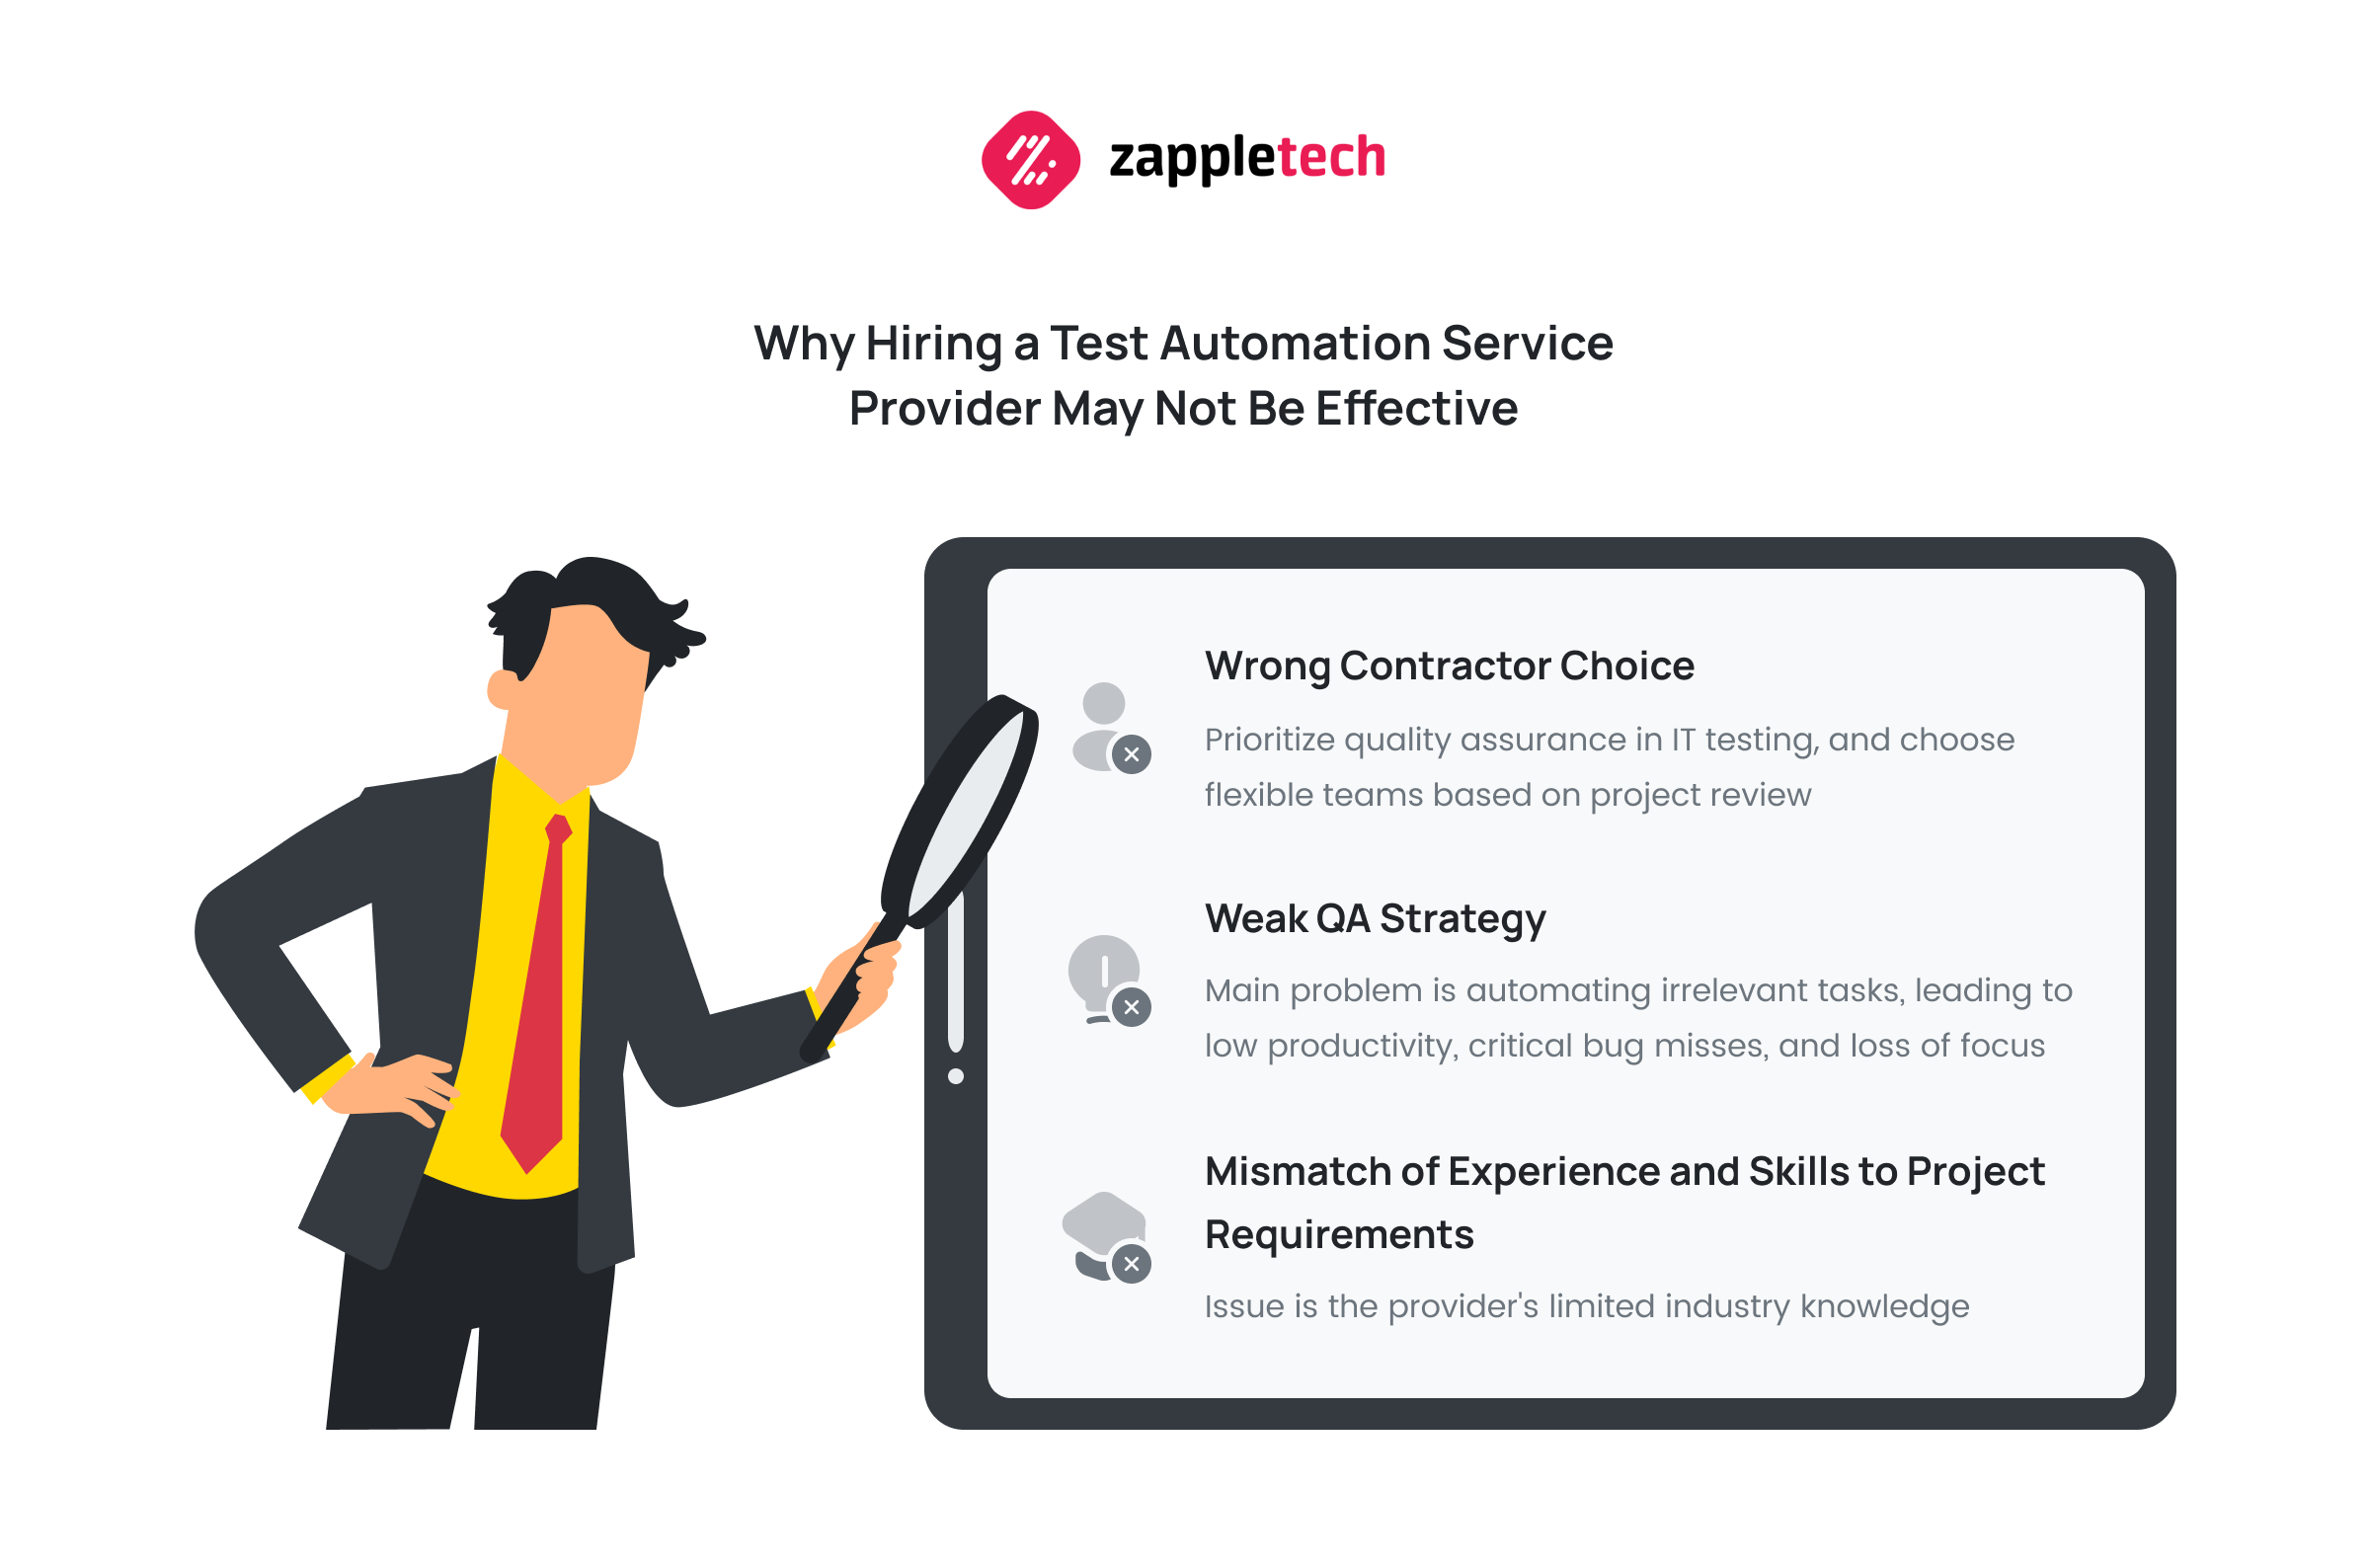 Reasons Why Hiring a Test Automation Service Provider May Not Be Effective